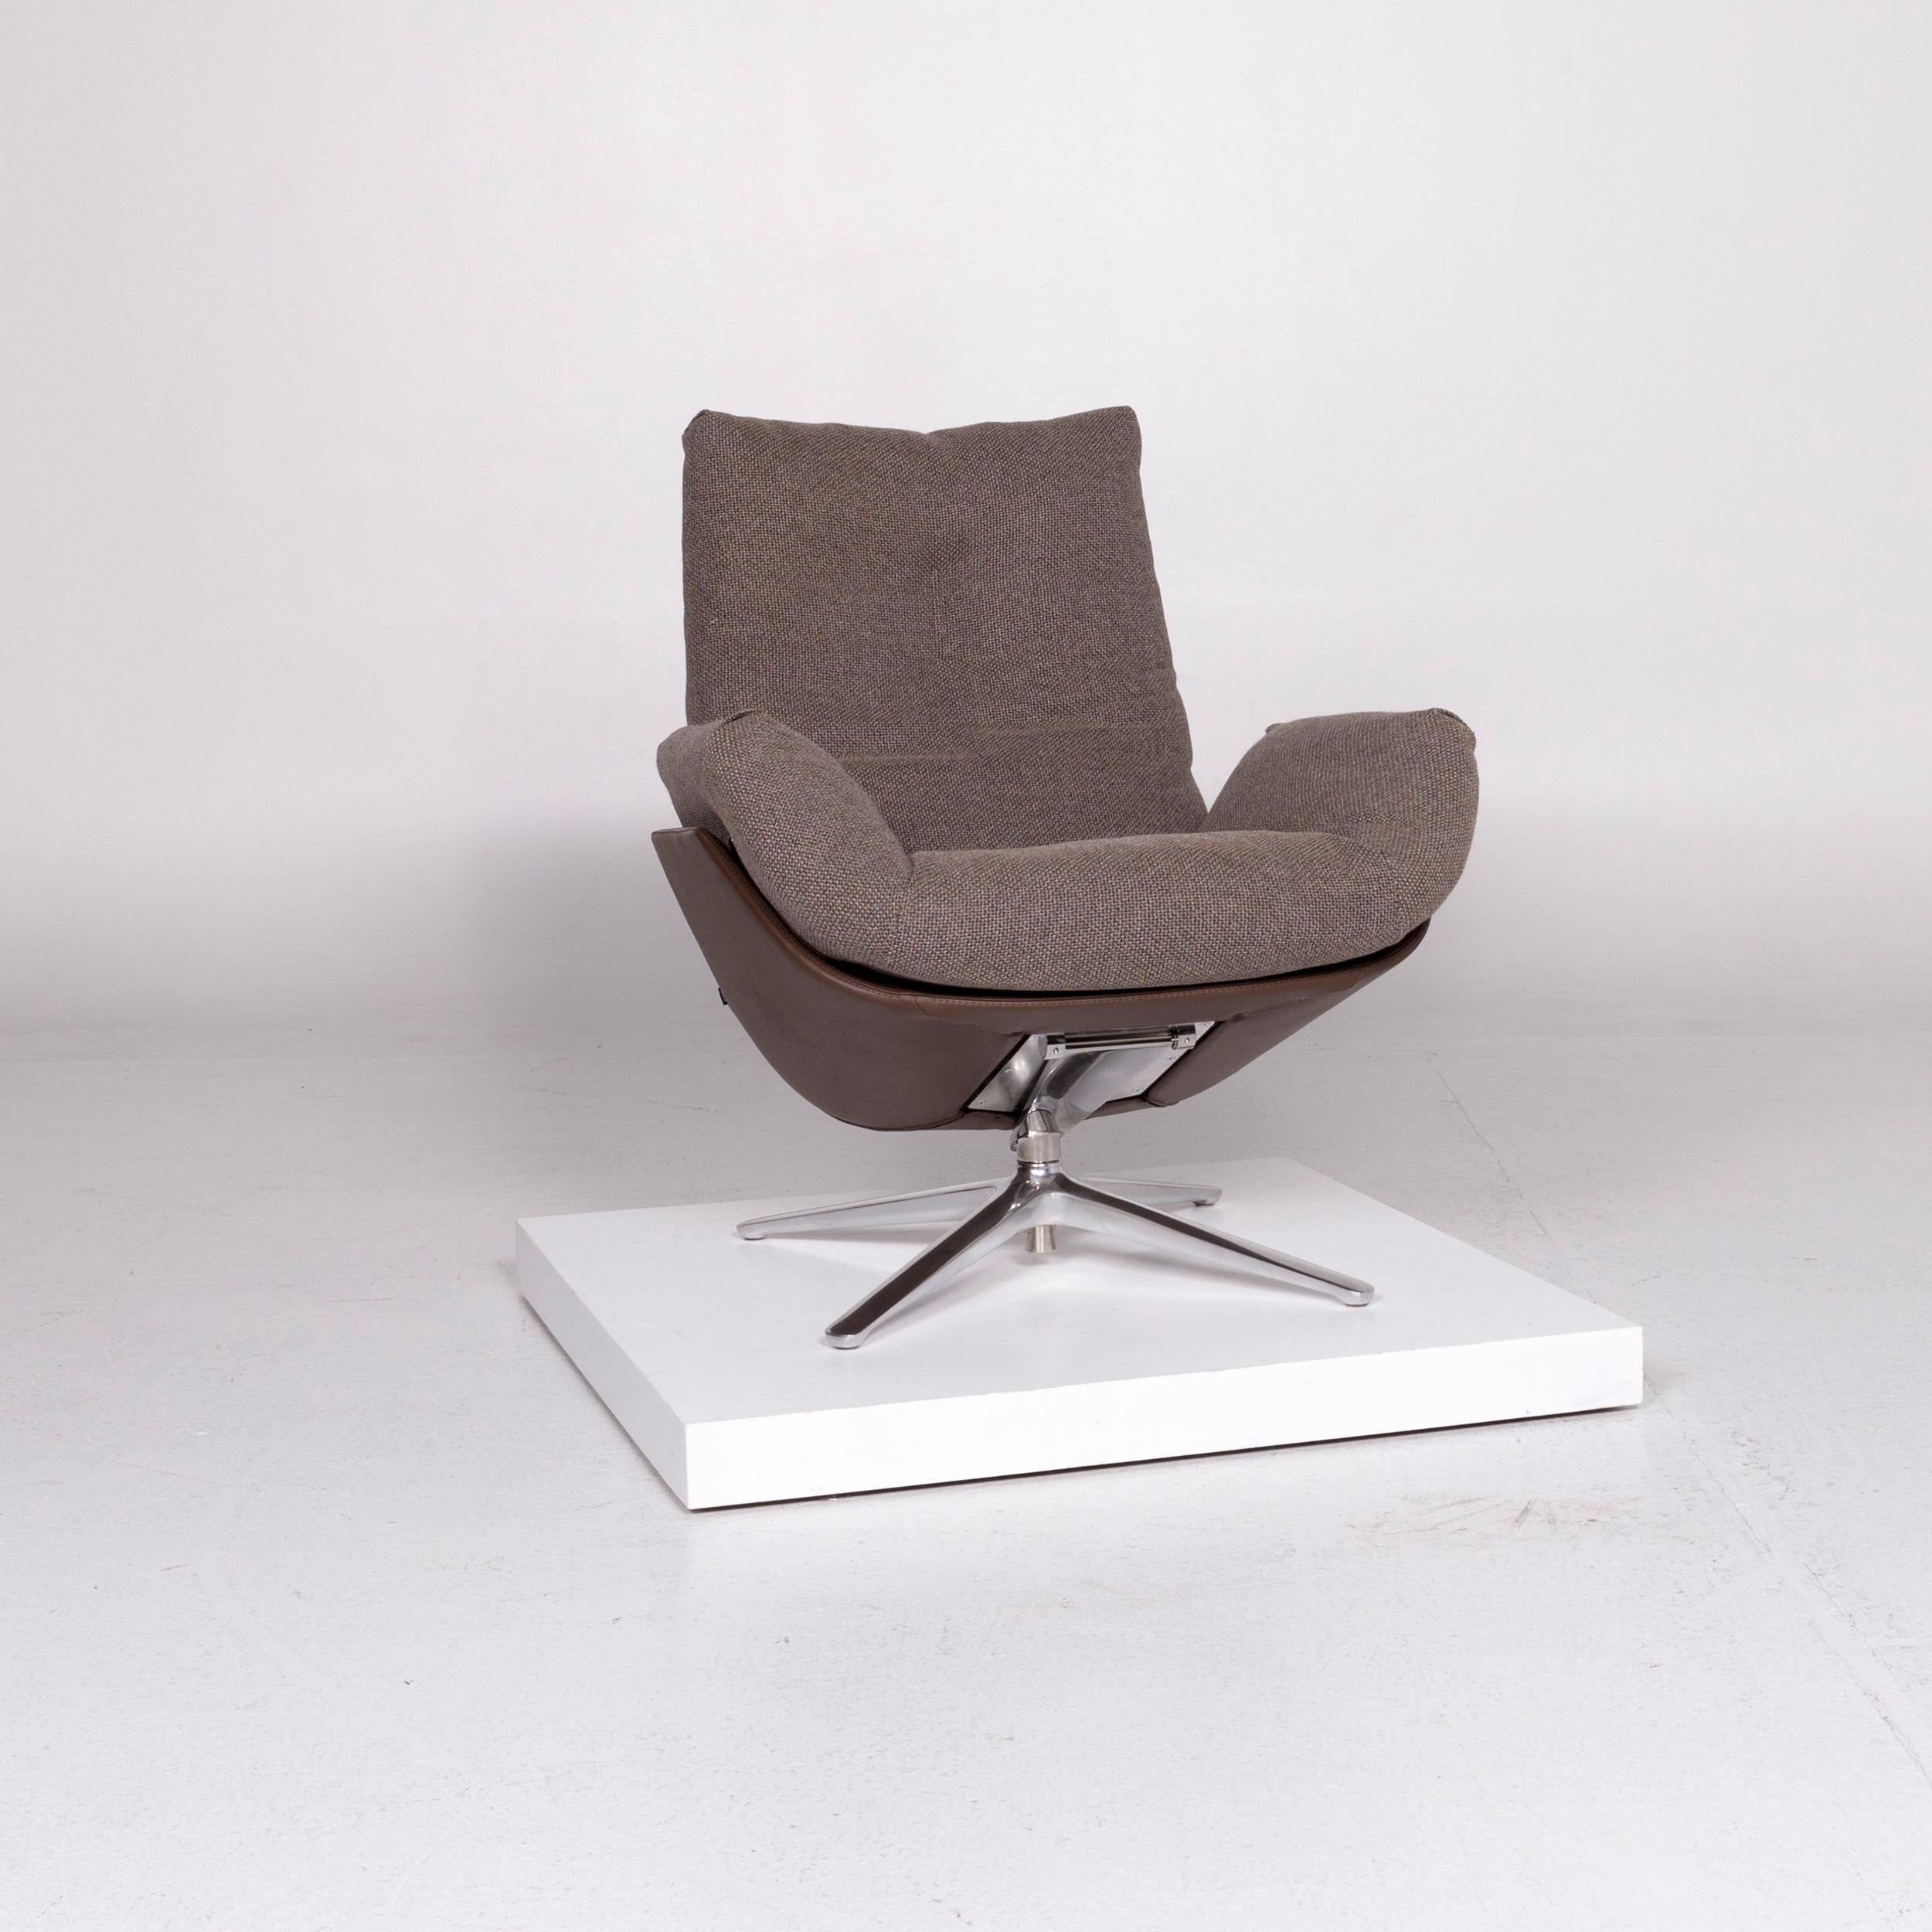 We bring to you a COR Cordia fabric lounge chair brown mud tilt function relax function.

Product measurements in centimeters:
 
Depth 92
Width 80
Height 106
Seat-height 51
Rest-height 64
Seat-depth 52
Seat-width 44
Back-height 59.
  